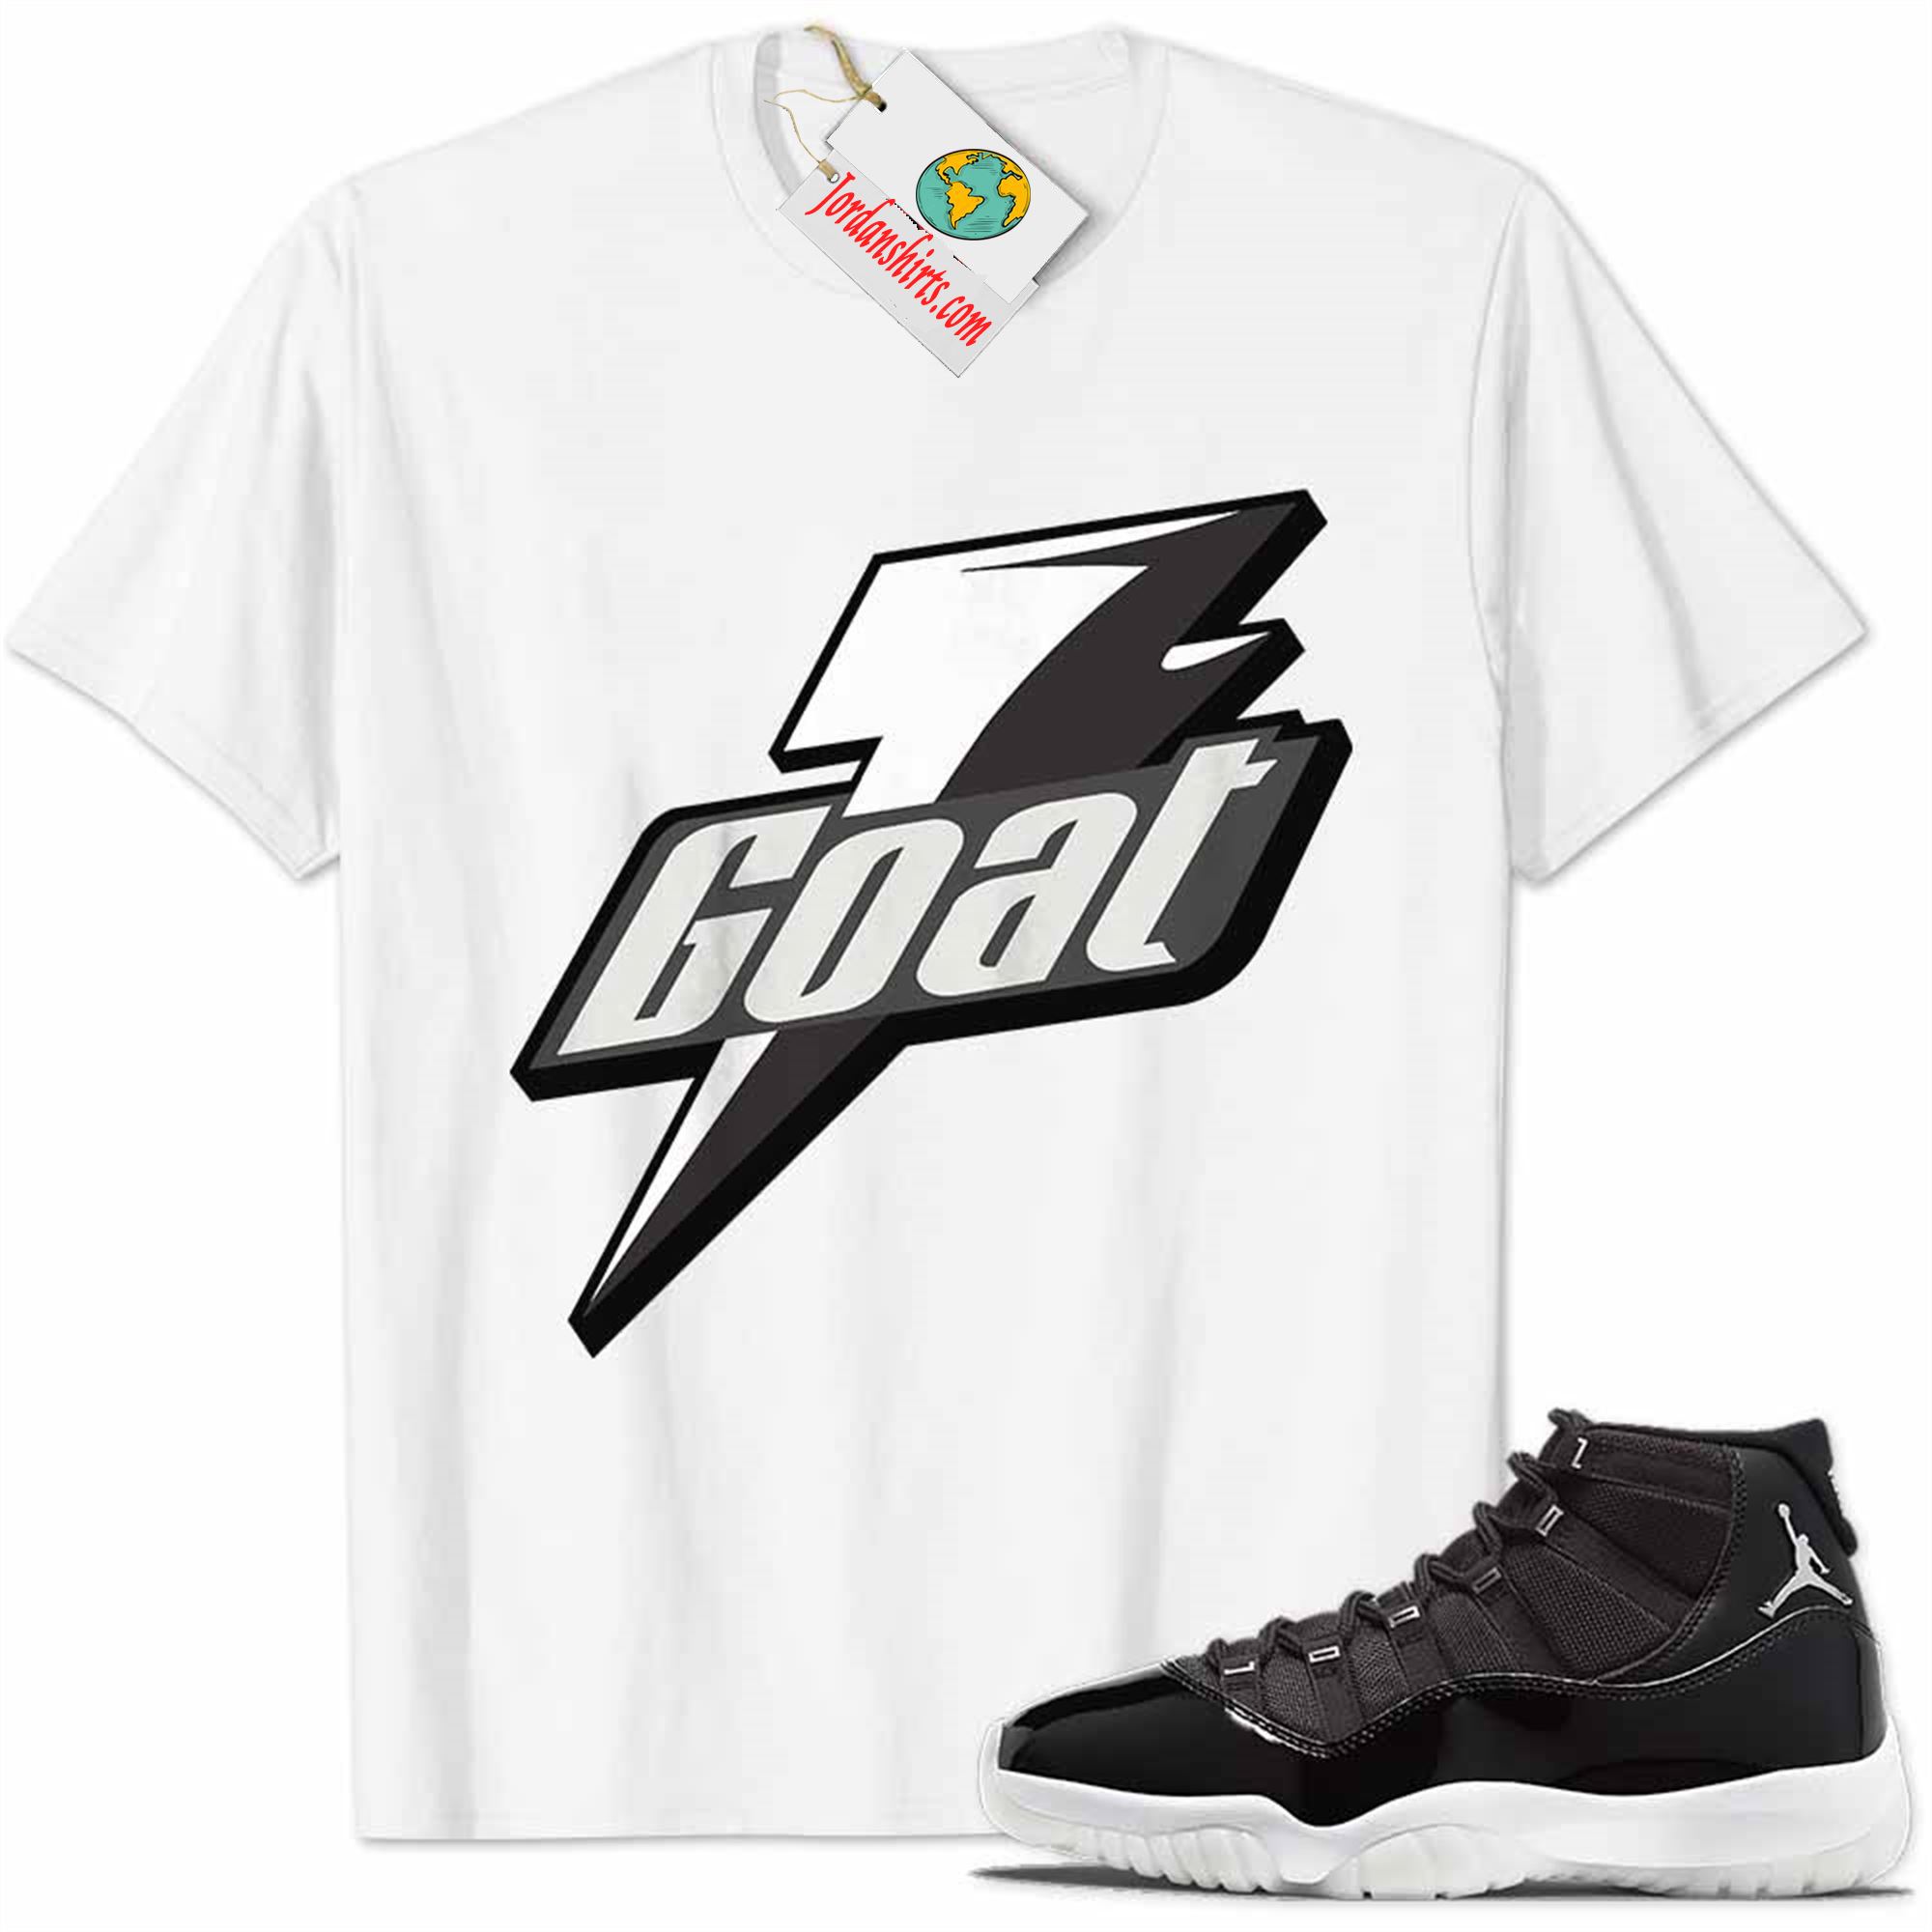 Jordan 11 Shirt, Jubilee 11s Shirt Goat Greatest Of All Time White Plus Size Up To 5xl